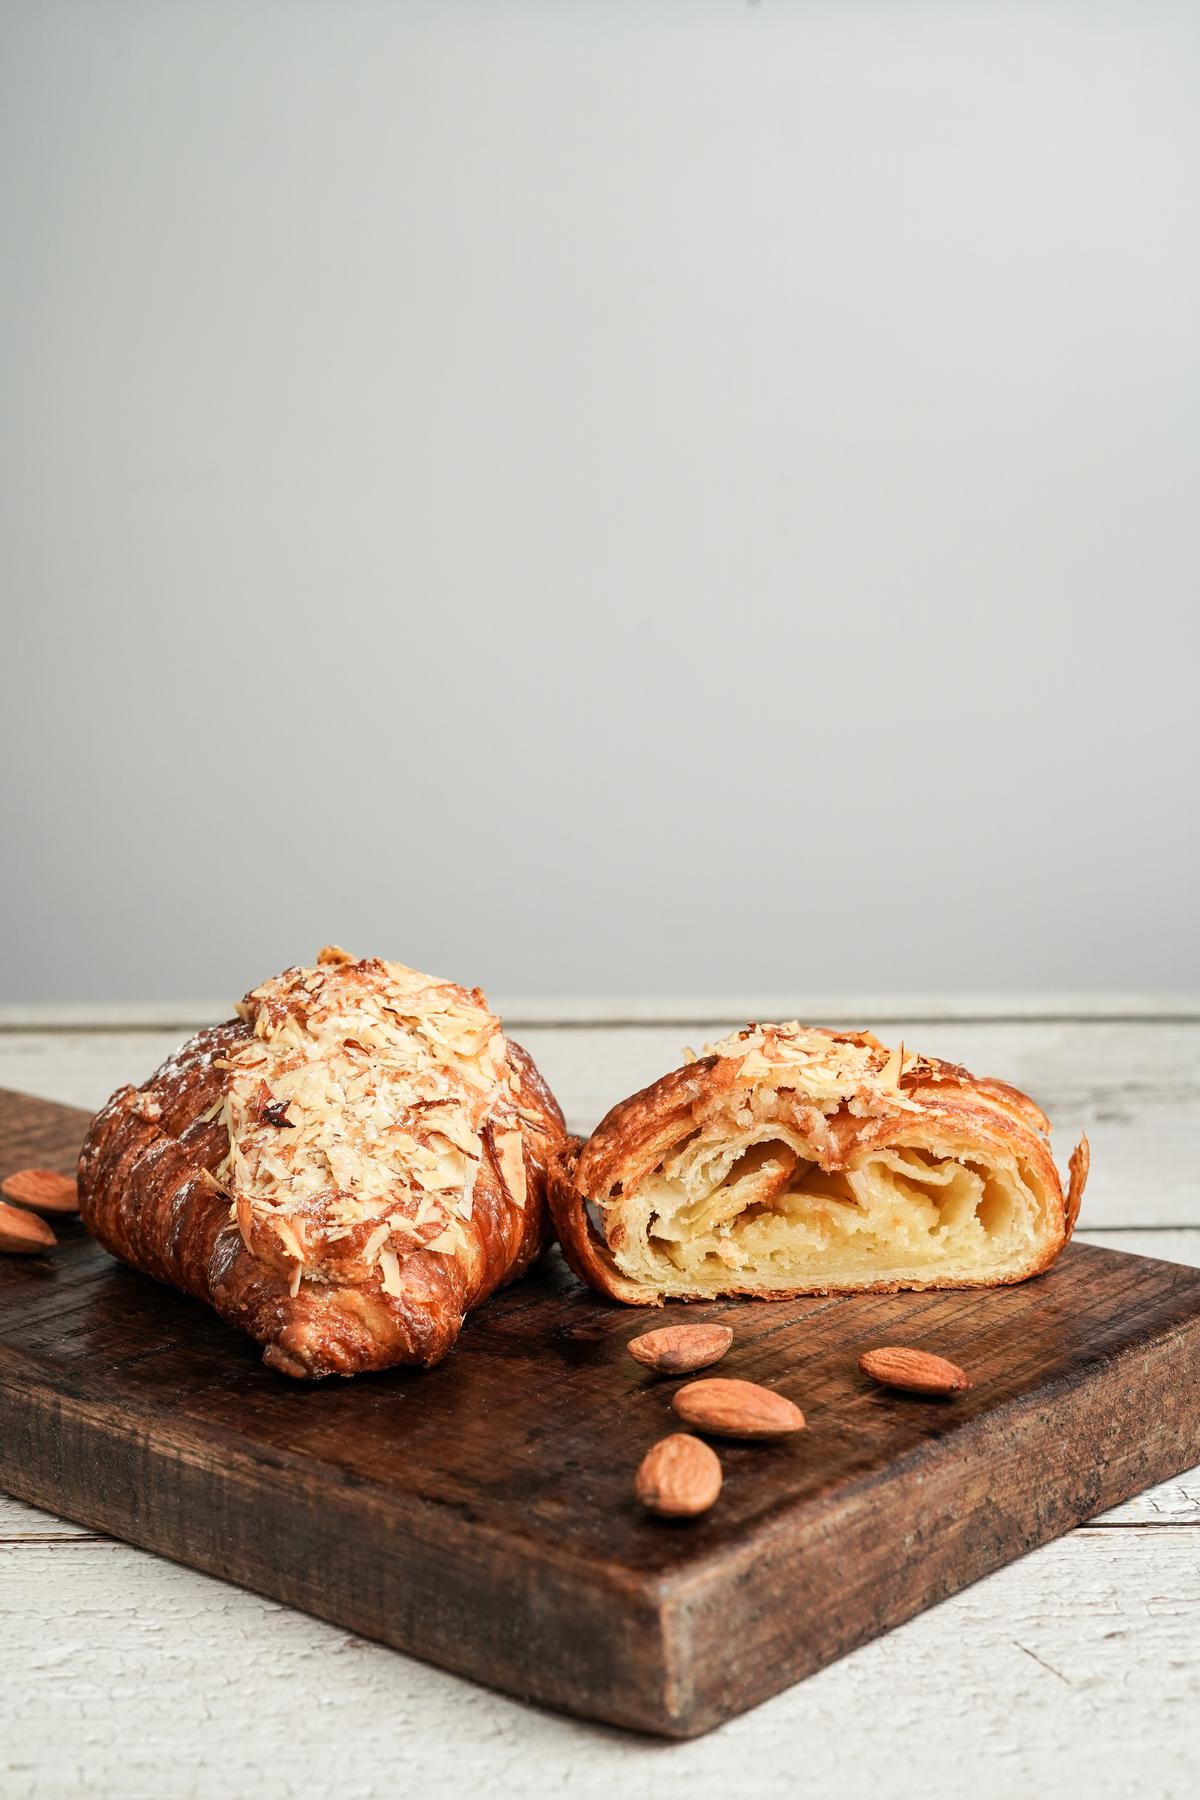 Freshly baked almond croissants is one of the croissants available in the newly-opened La Forno Cafe in Thiruvananthapuram 